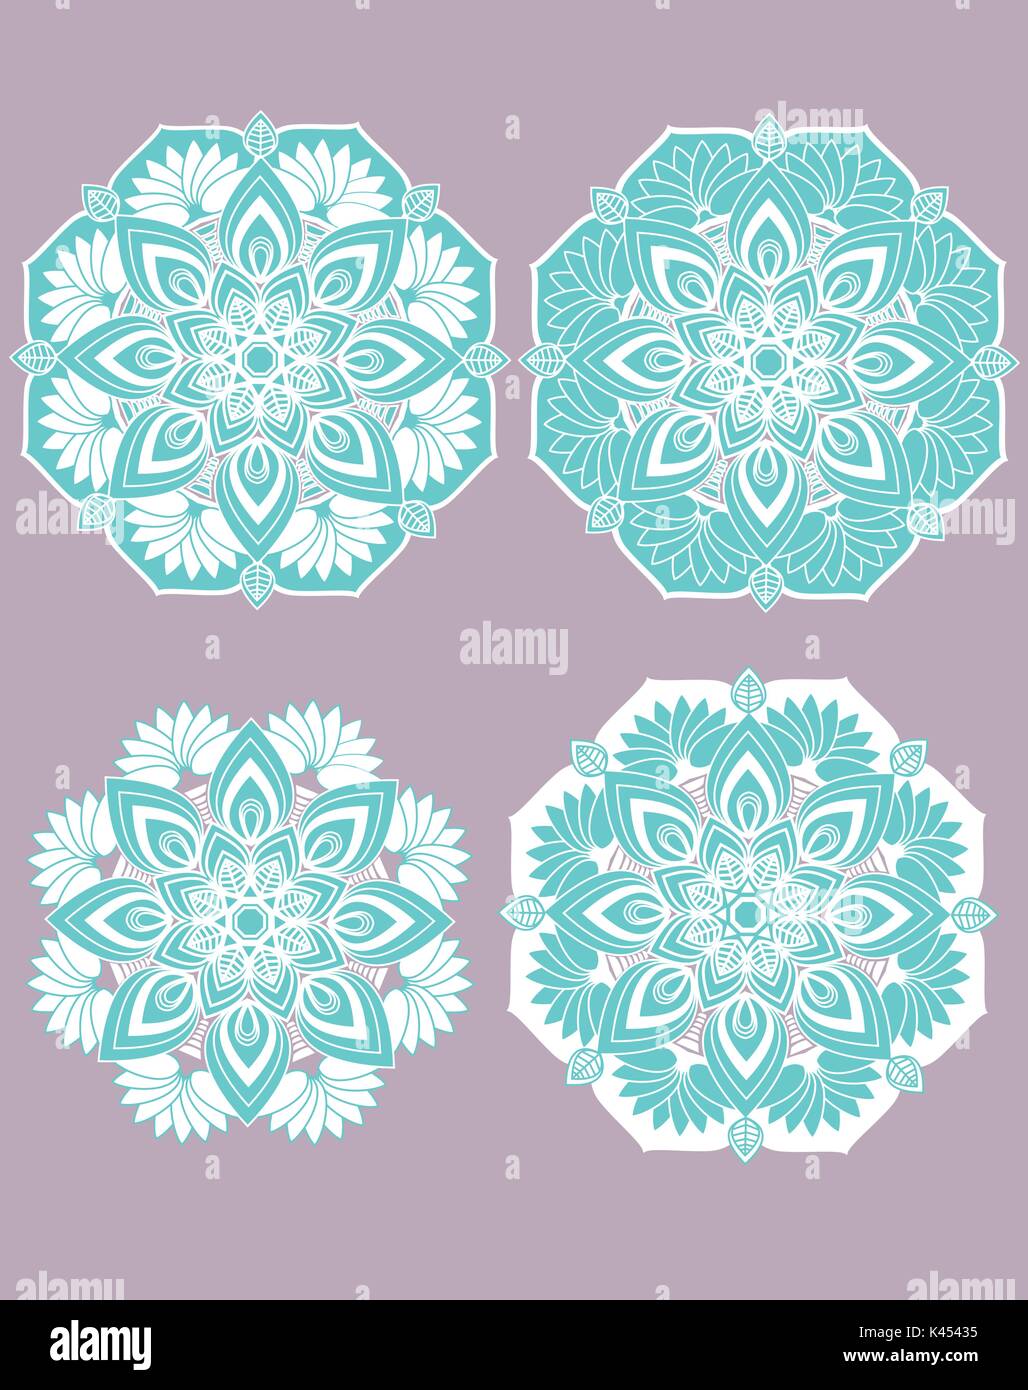 Decorative Chinese patterns with different was of filling in Stock Vector